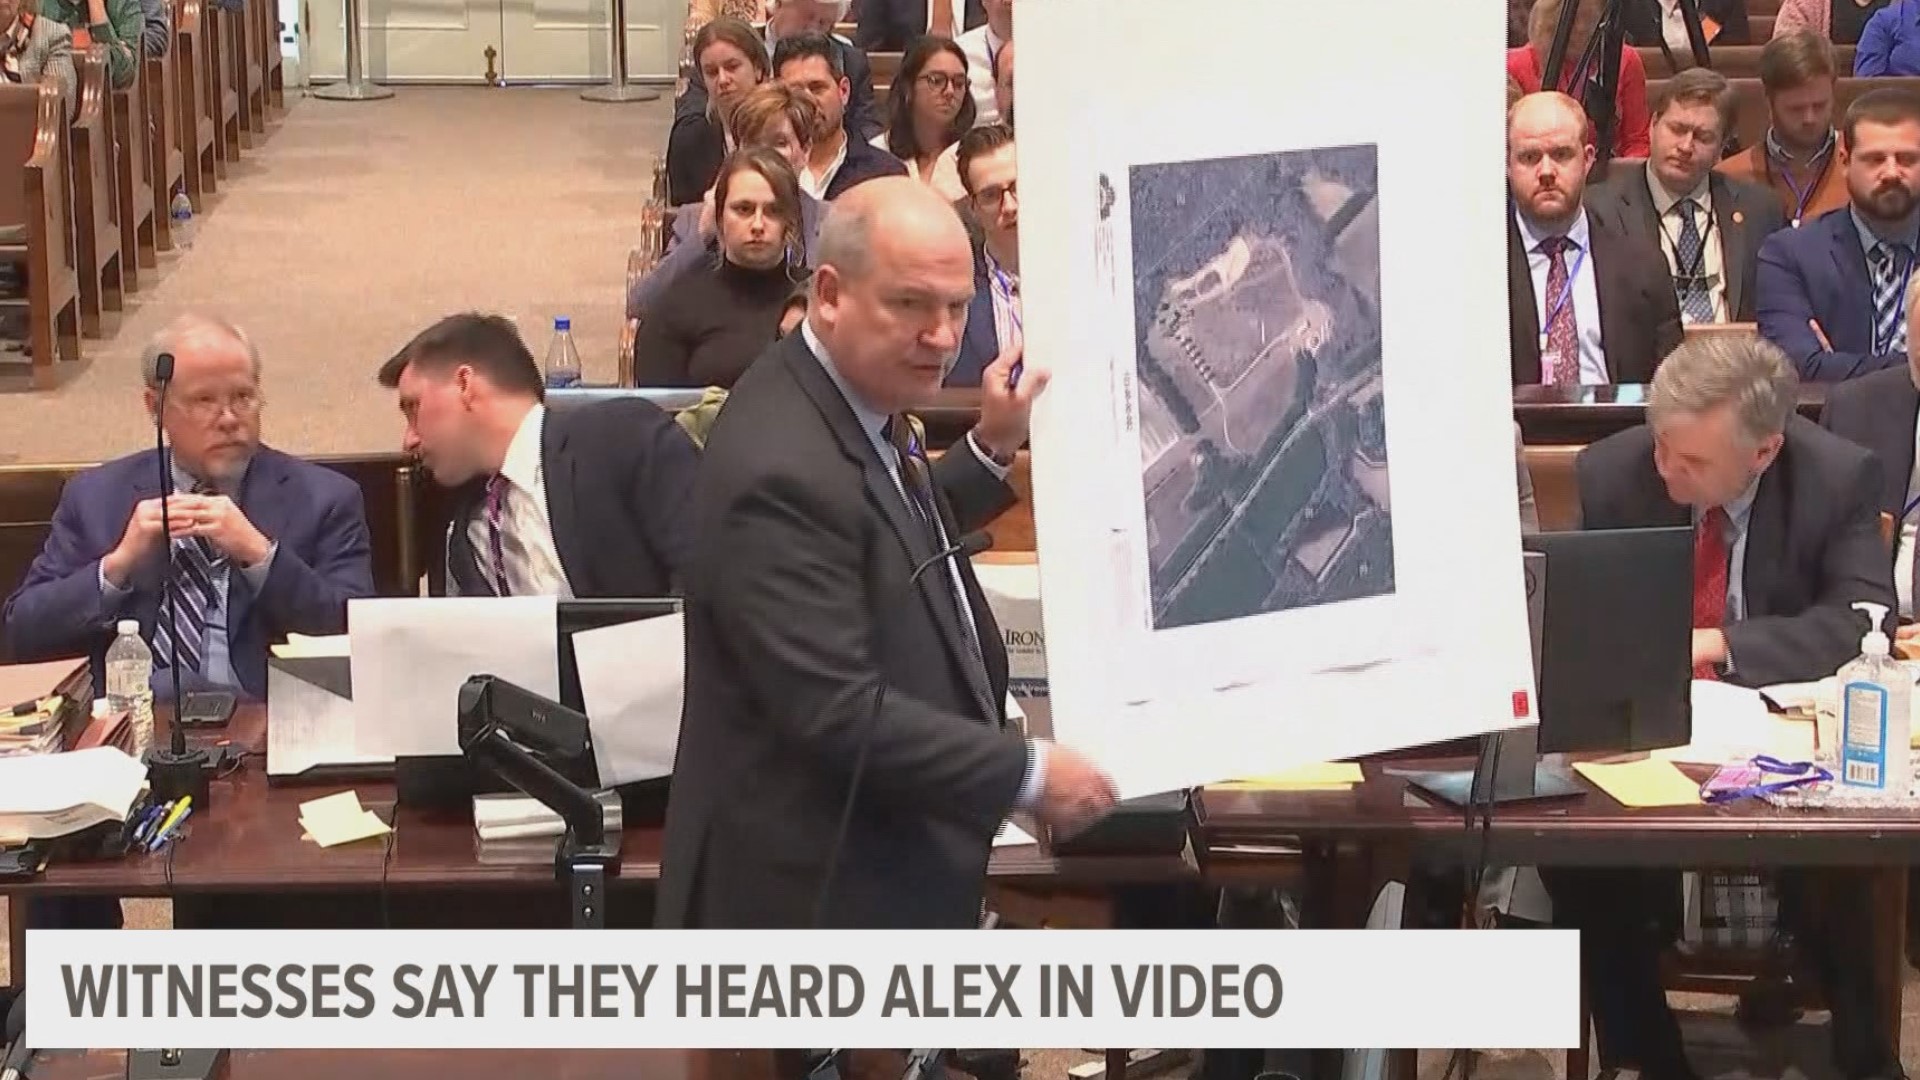 Cell phone videos taken on the day of the killings were discussed in the Alex Murdaugh trial.